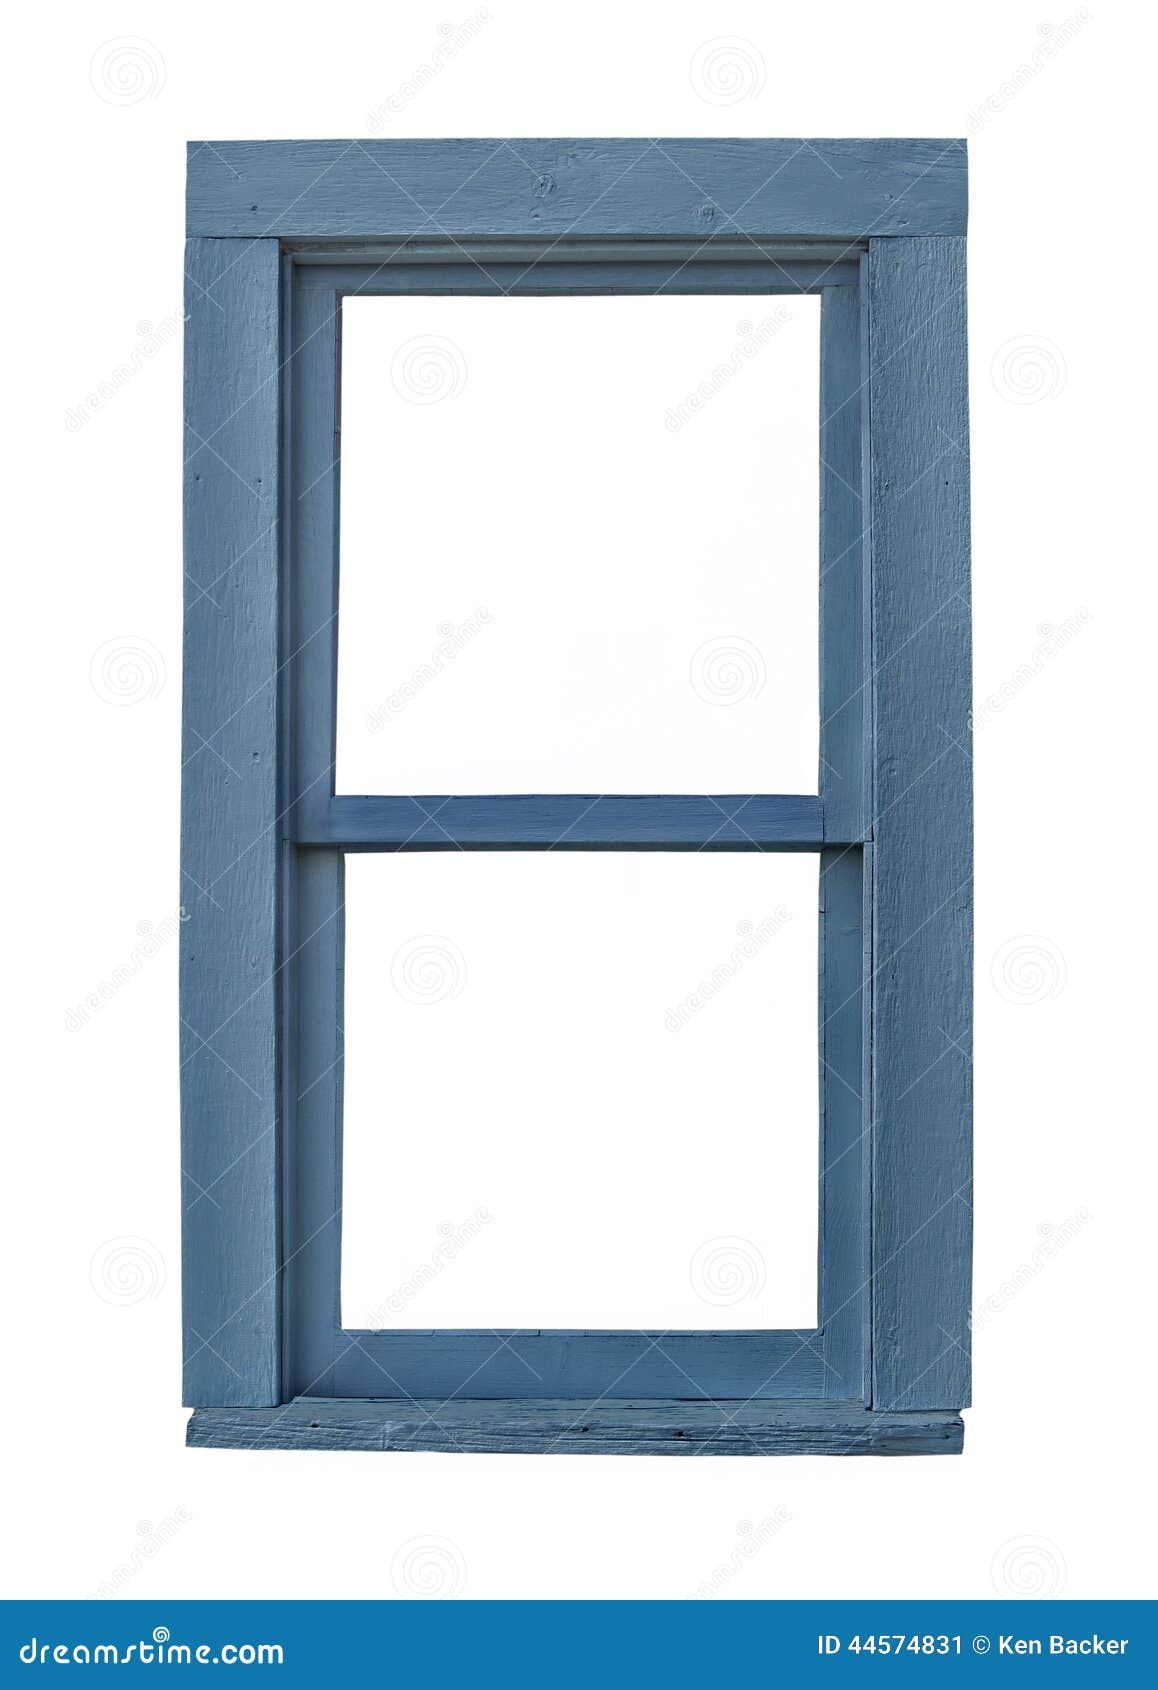 Old Blue Wooden Window Isolated. Stock Image - Image of panels ...